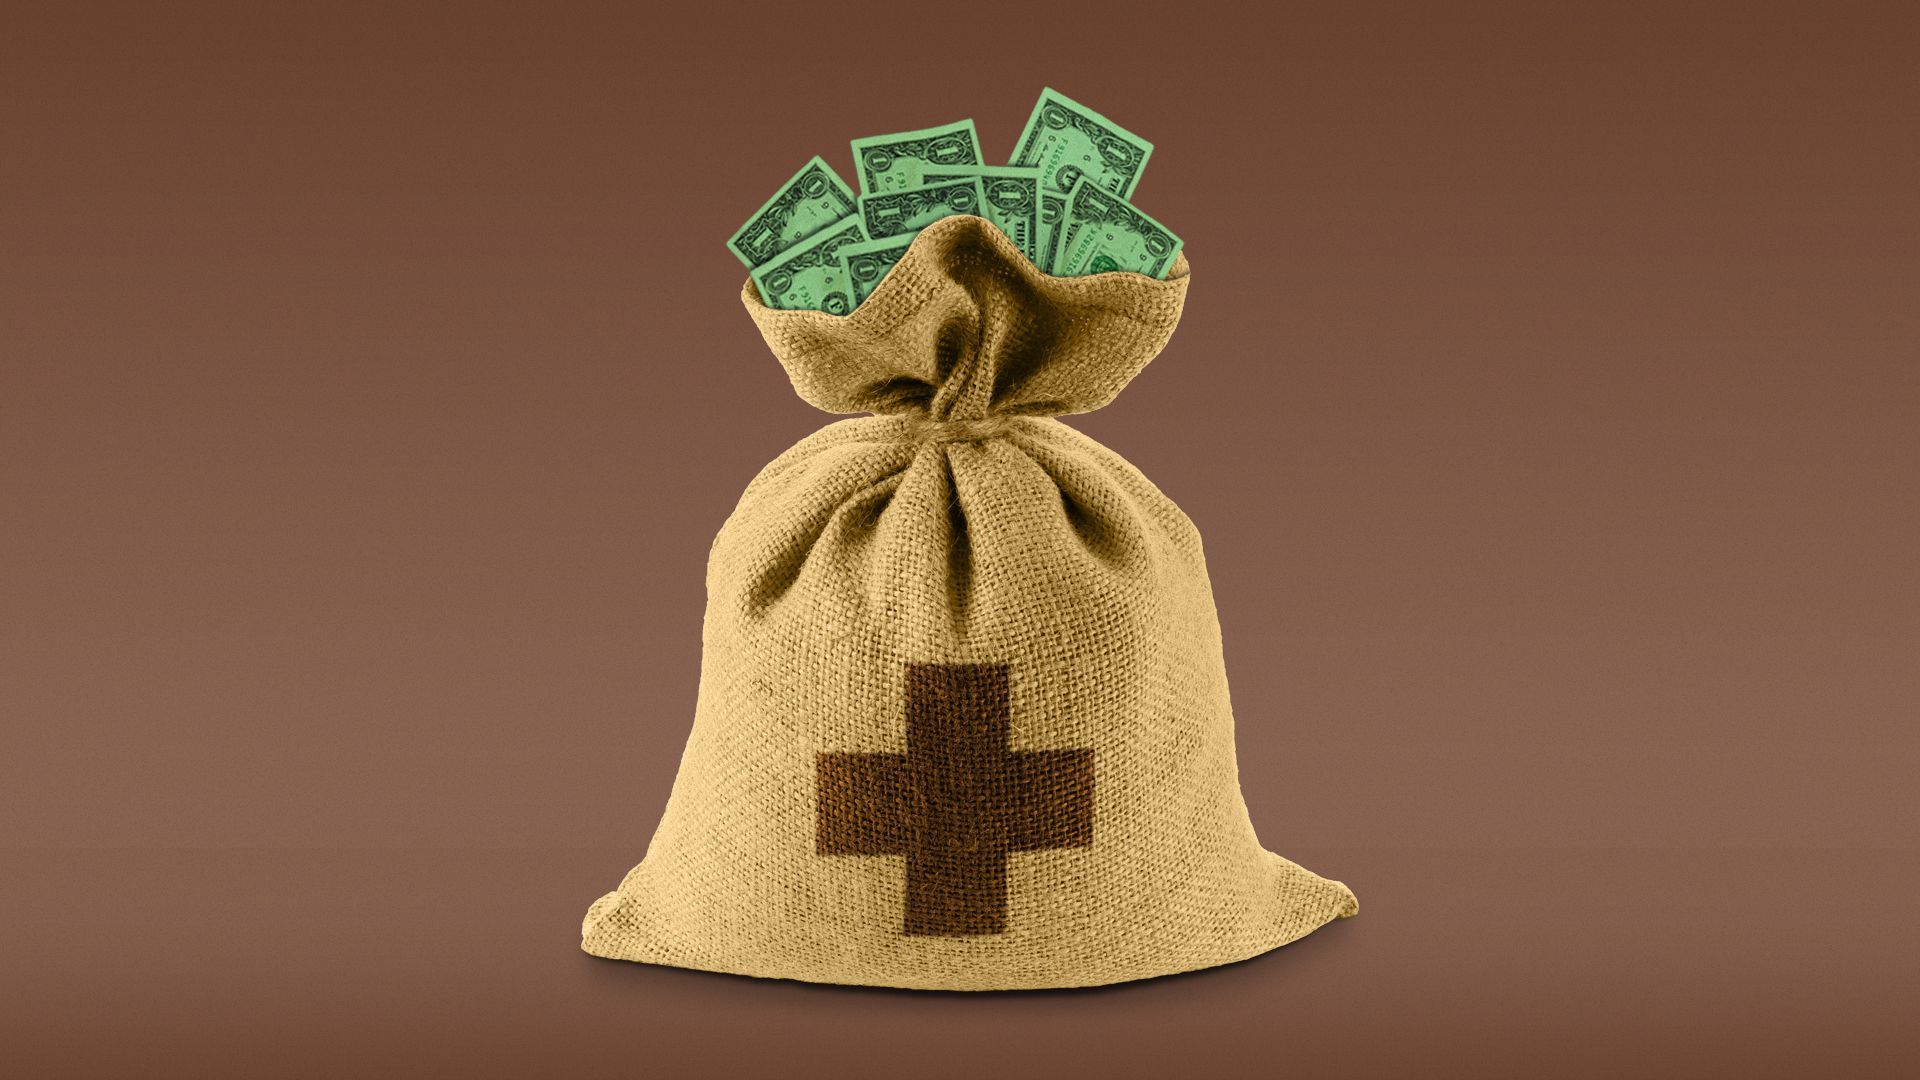 Illustration of a sack of money with a medical cross symbol on it.